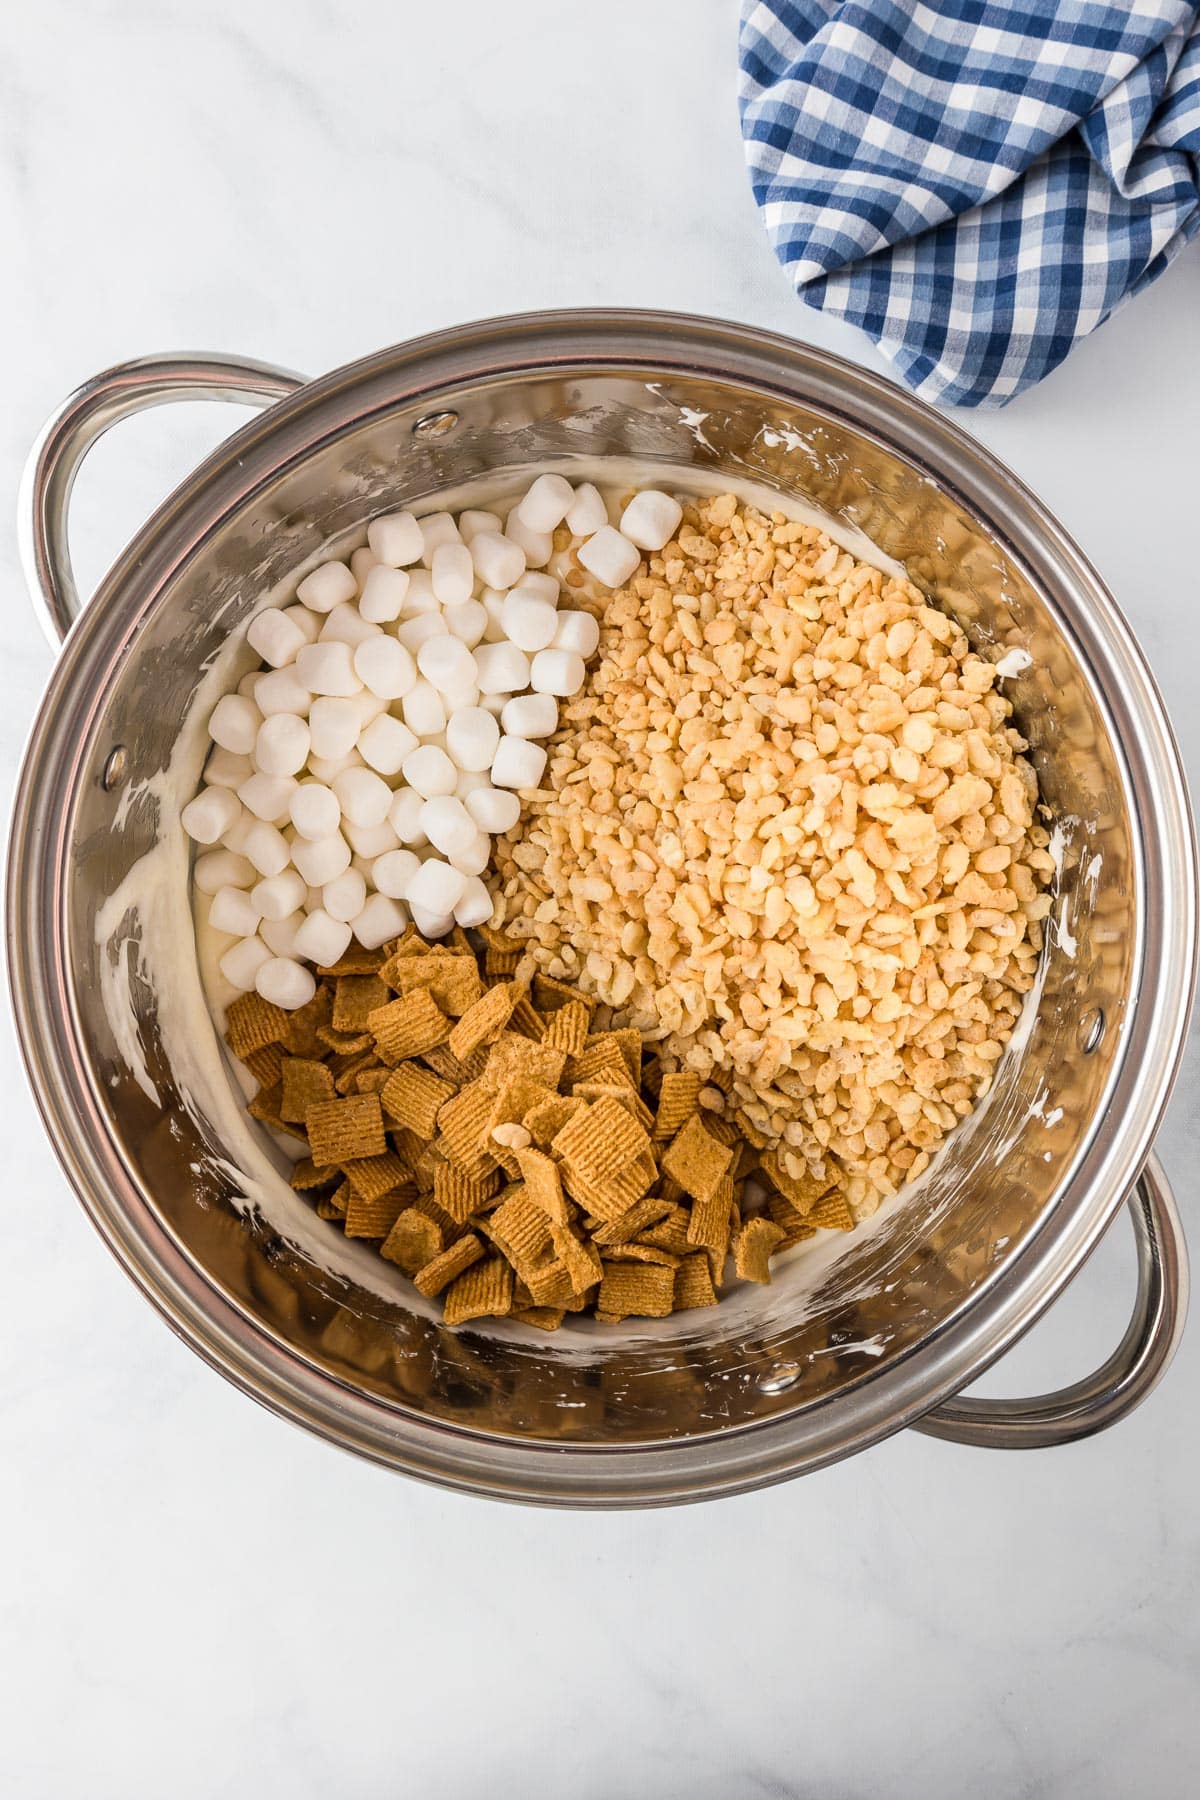 A large metal bowl with Golden Grahams cereal, Rice Krispie cereal and mini marshmallows.